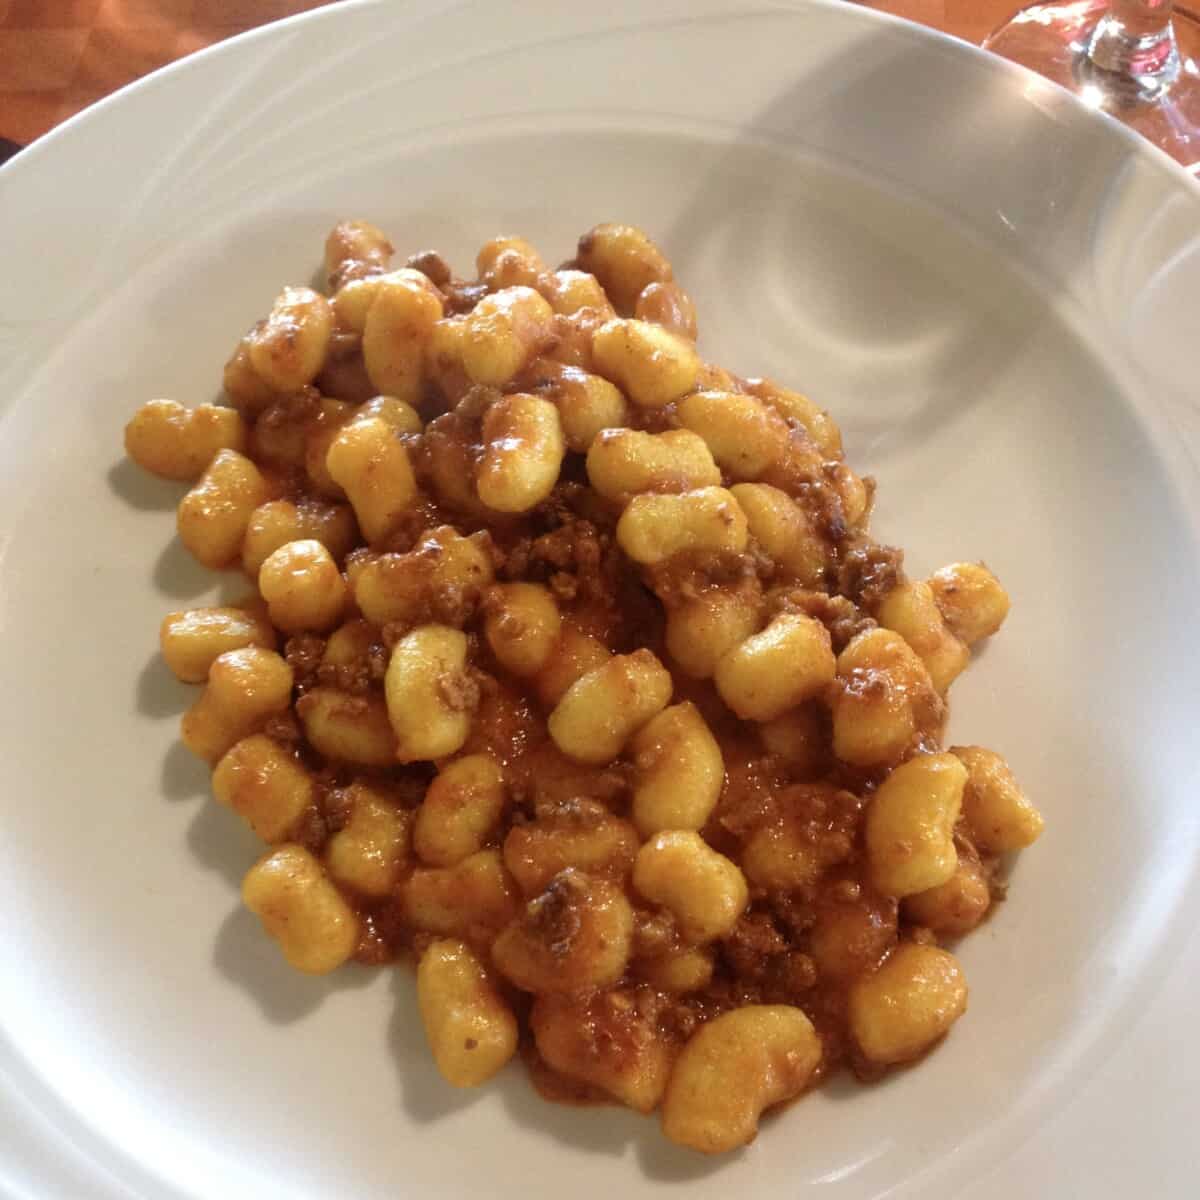 Gnocchi with ragù ordered from one of our regular Italian restaurants in the up the hills from us in NE Italy.